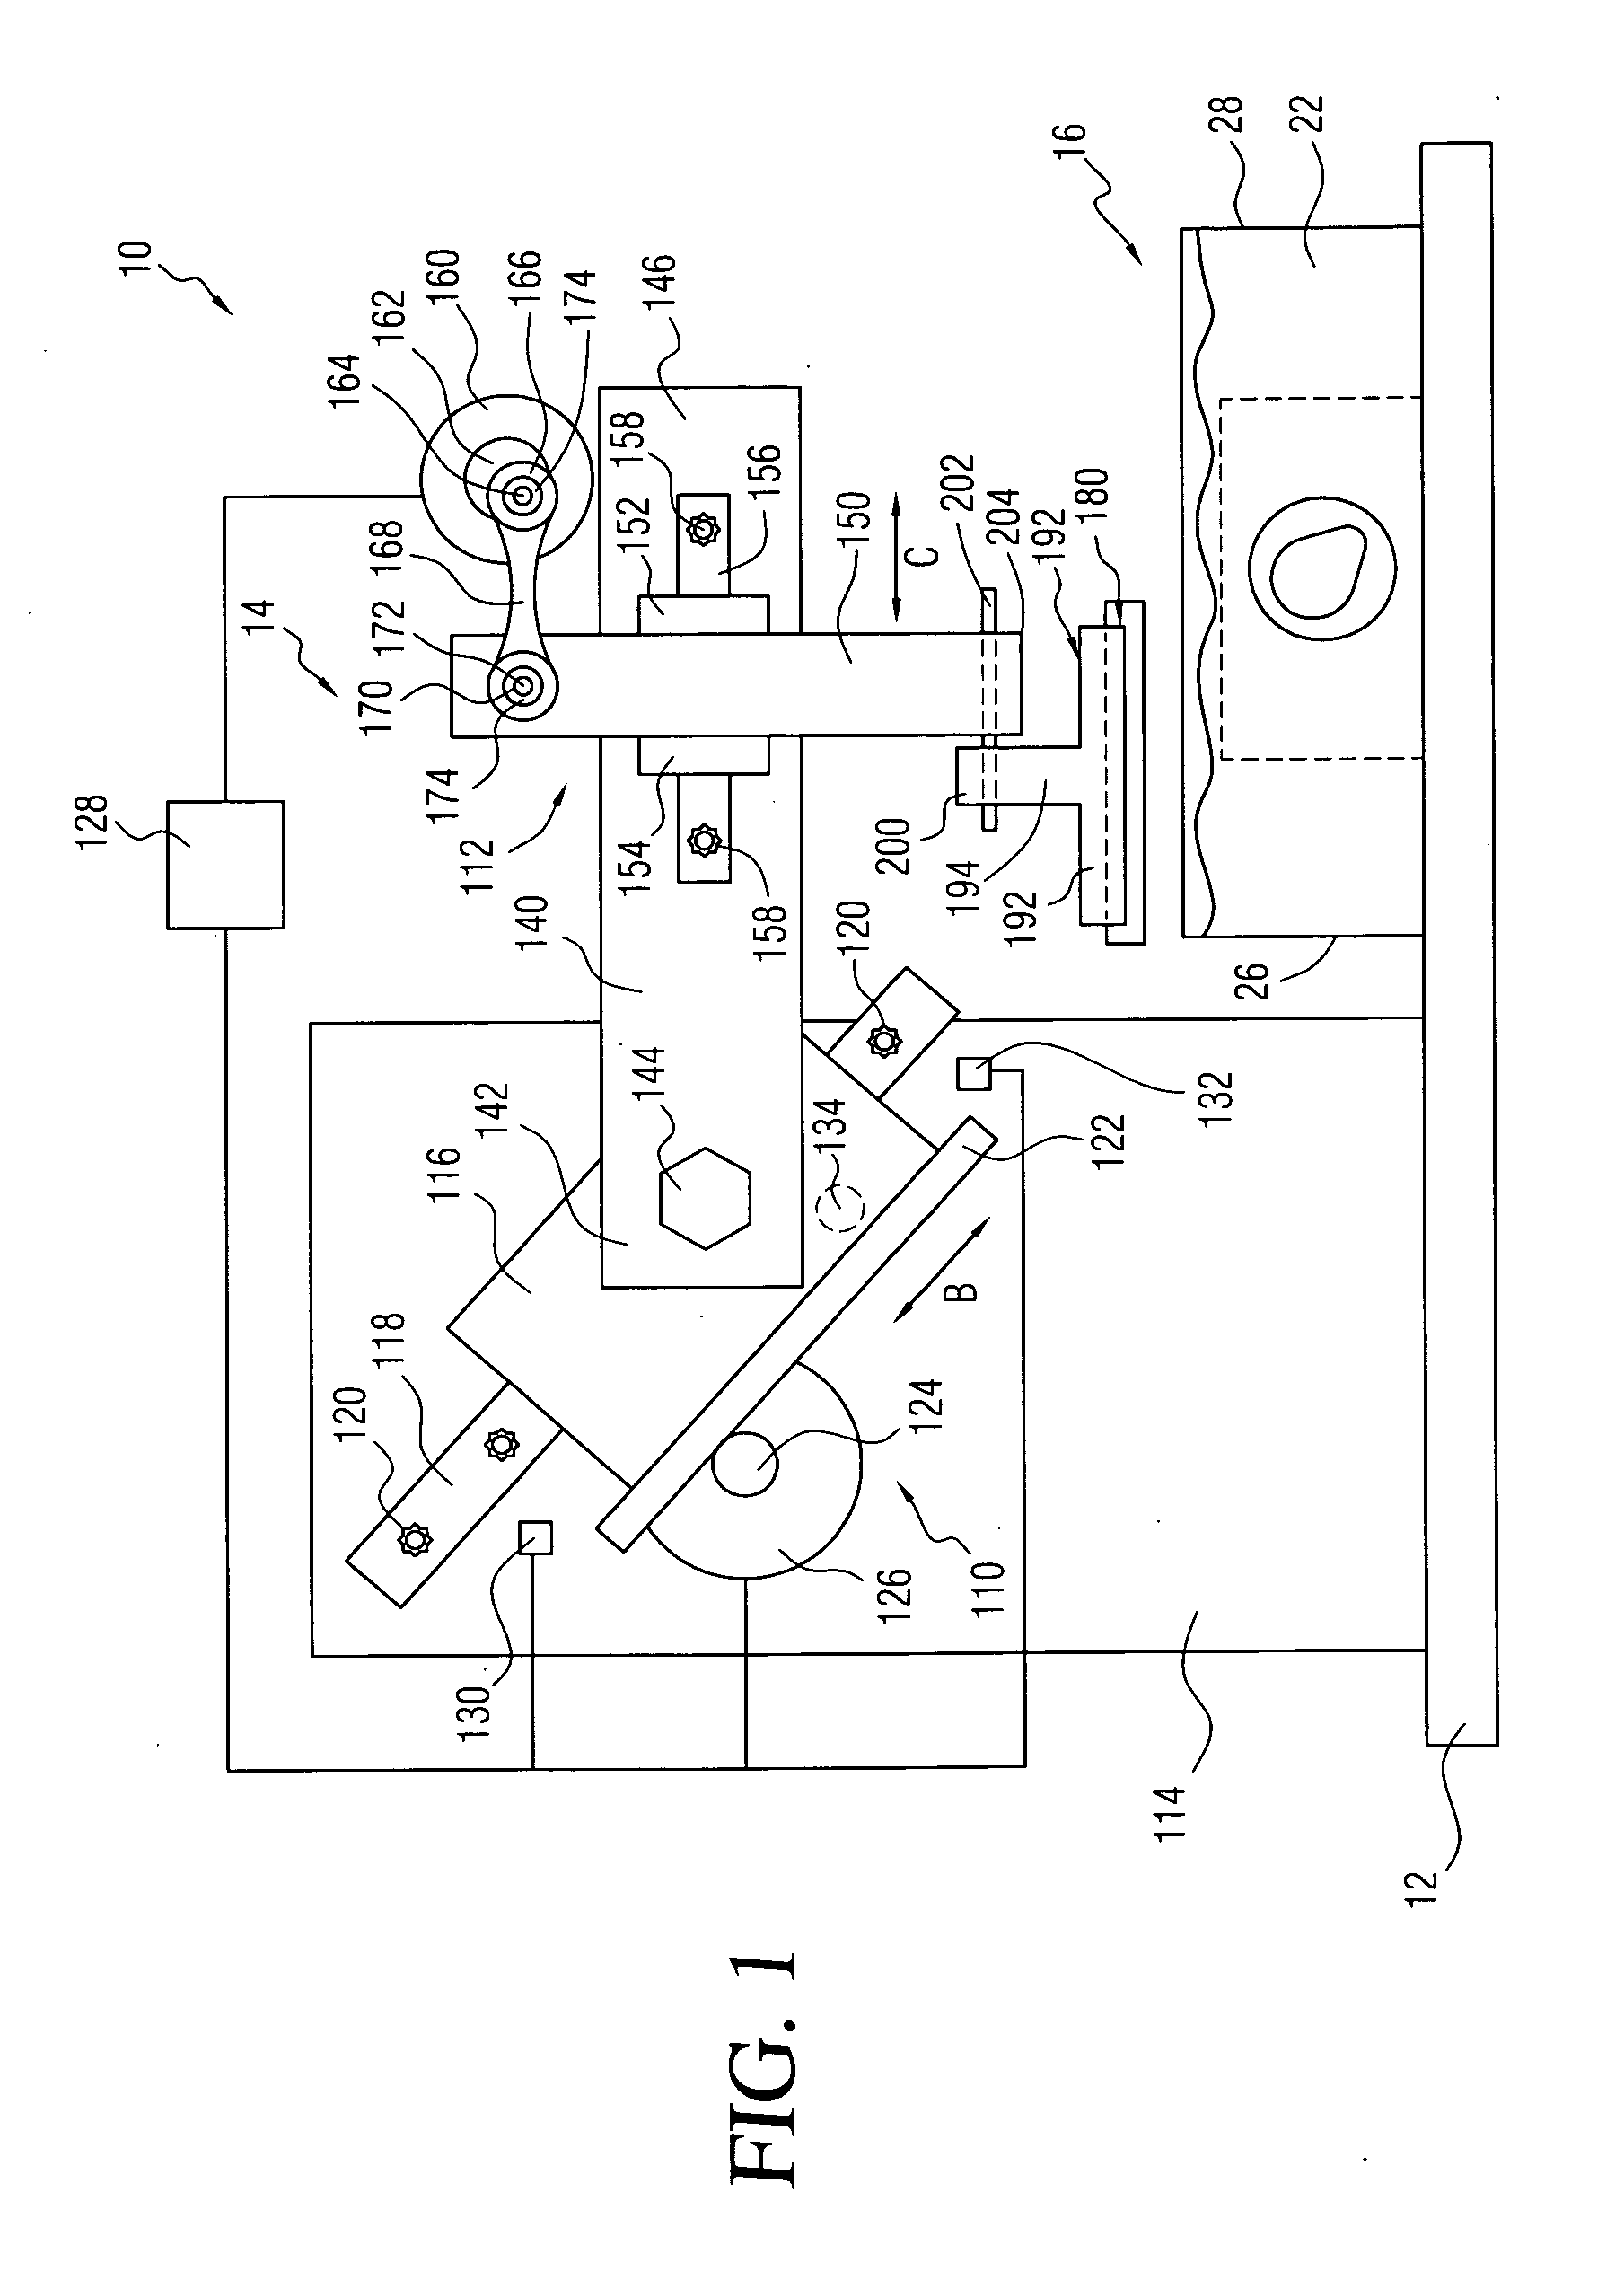 Method and device for cutting fresh tissue slices